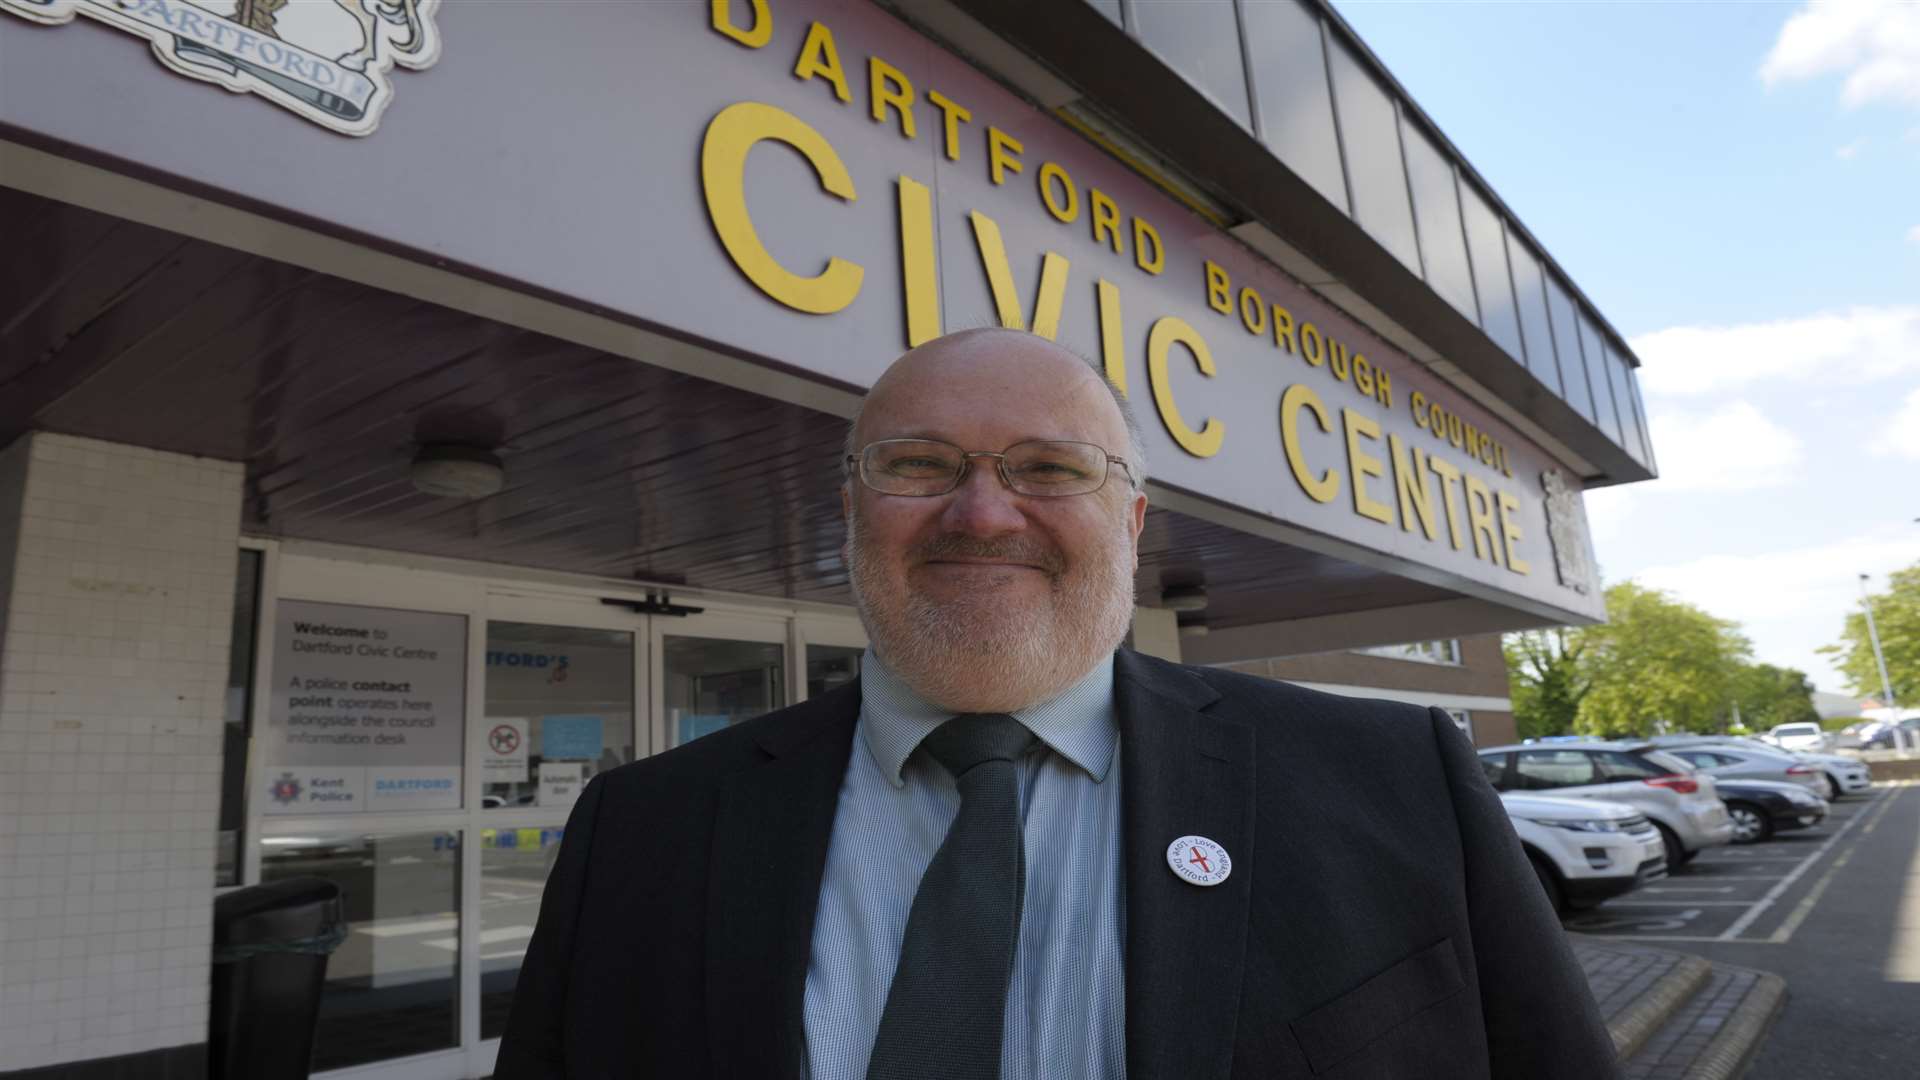 Cllr Jeremy Kite is proud of what Dartford has, and can, achieve